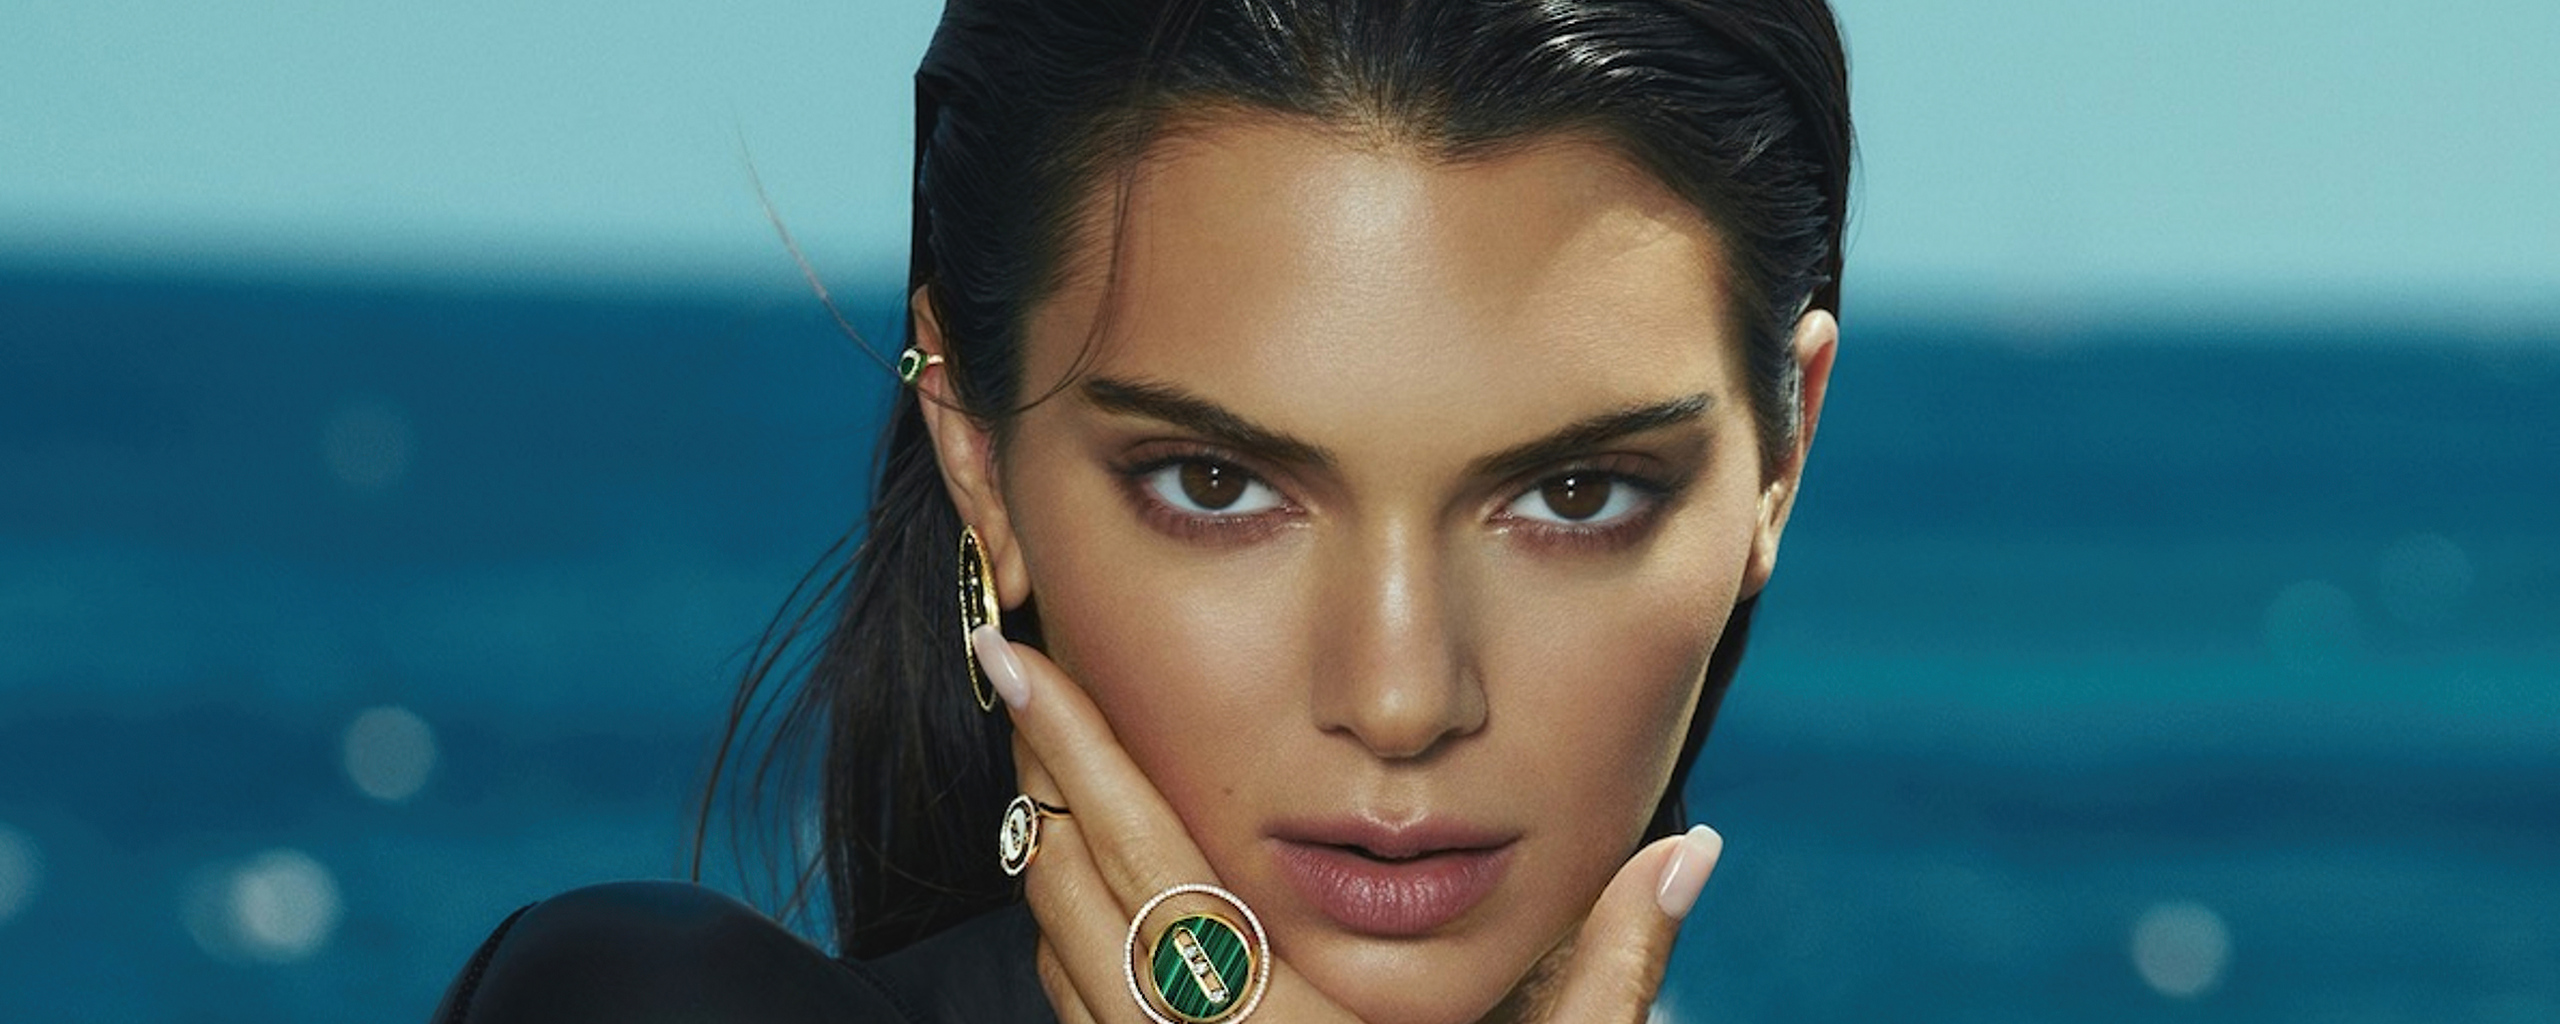 2022-kendall-jenner-messika-jewelry-campaign-4k-lh.jpg